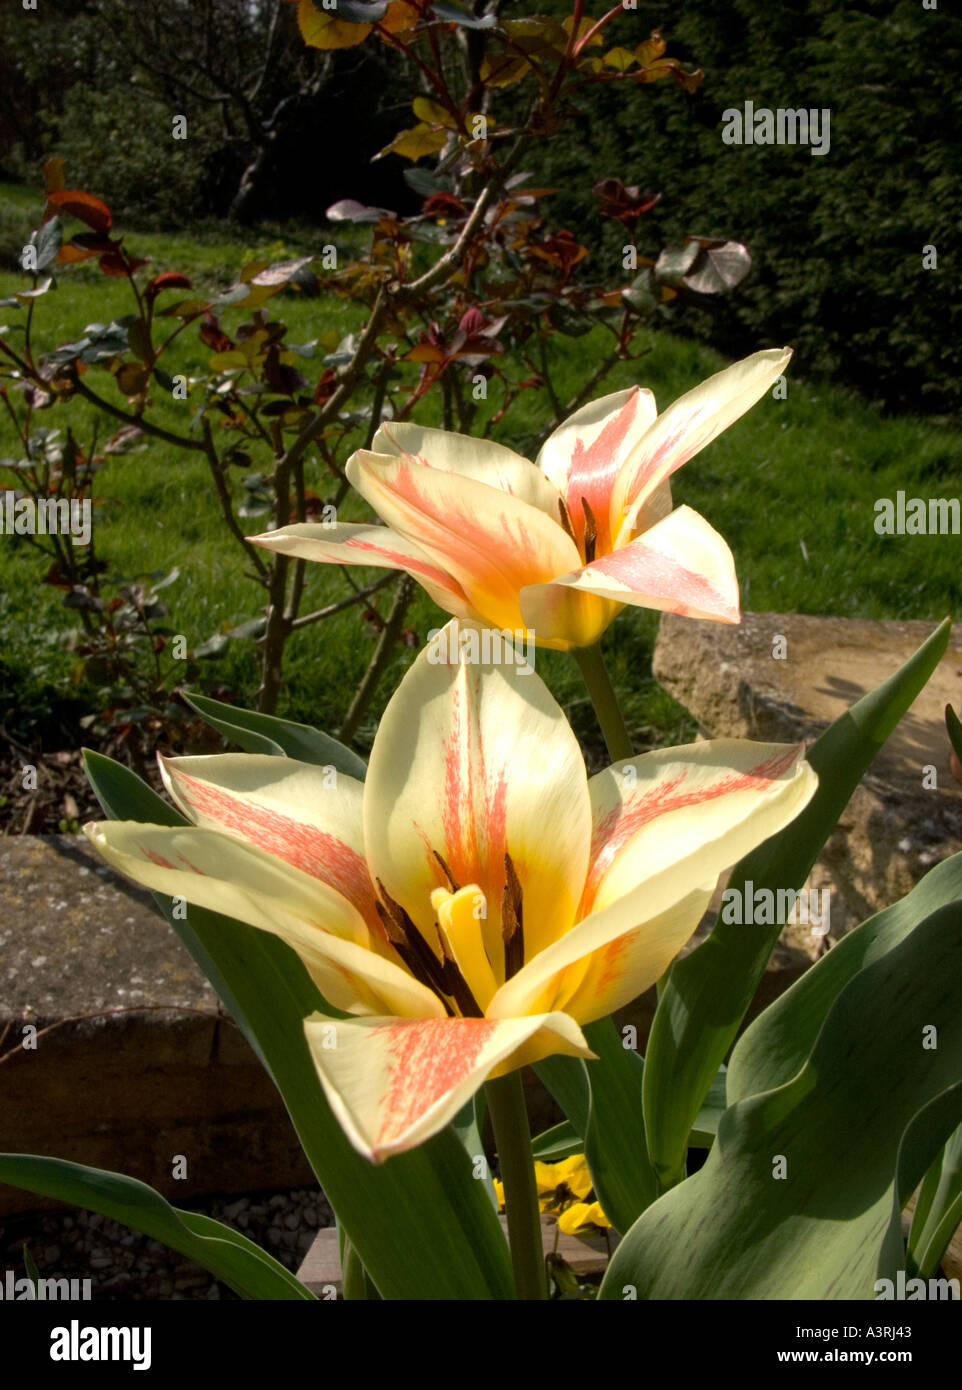 Cream and red tulip flowers fully open in the sun in an English garden Stock Photo